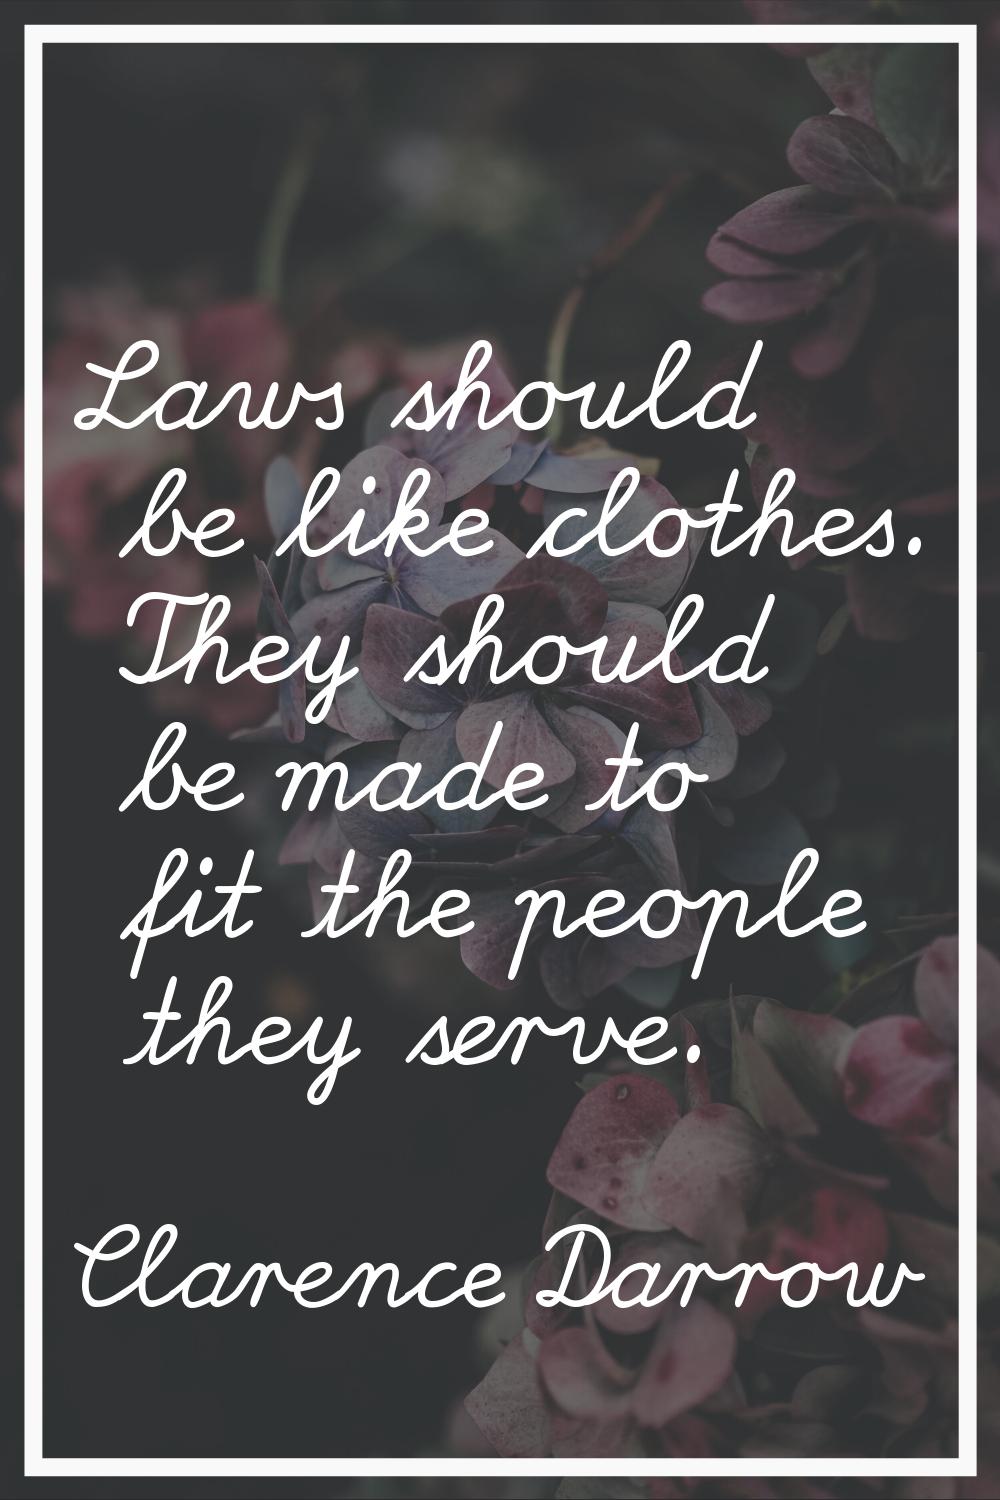 Laws should be like clothes. They should be made to fit the people they serve.